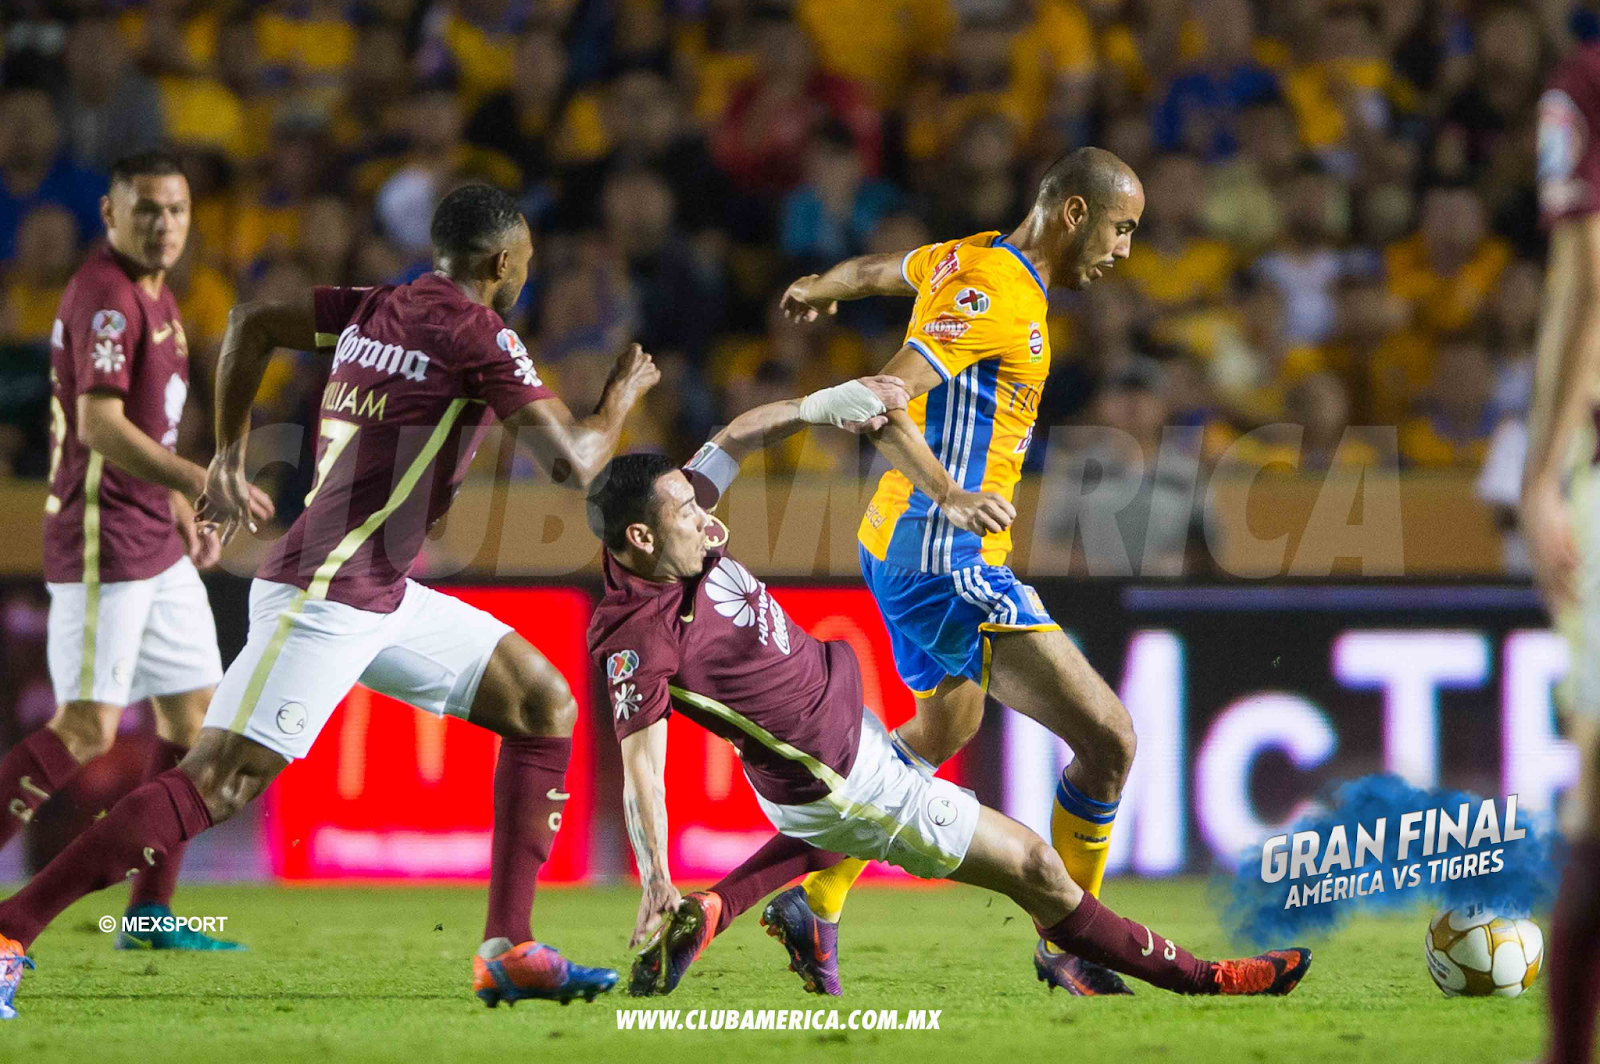 A Statistical Look at the América vs. Tigres Rivalry